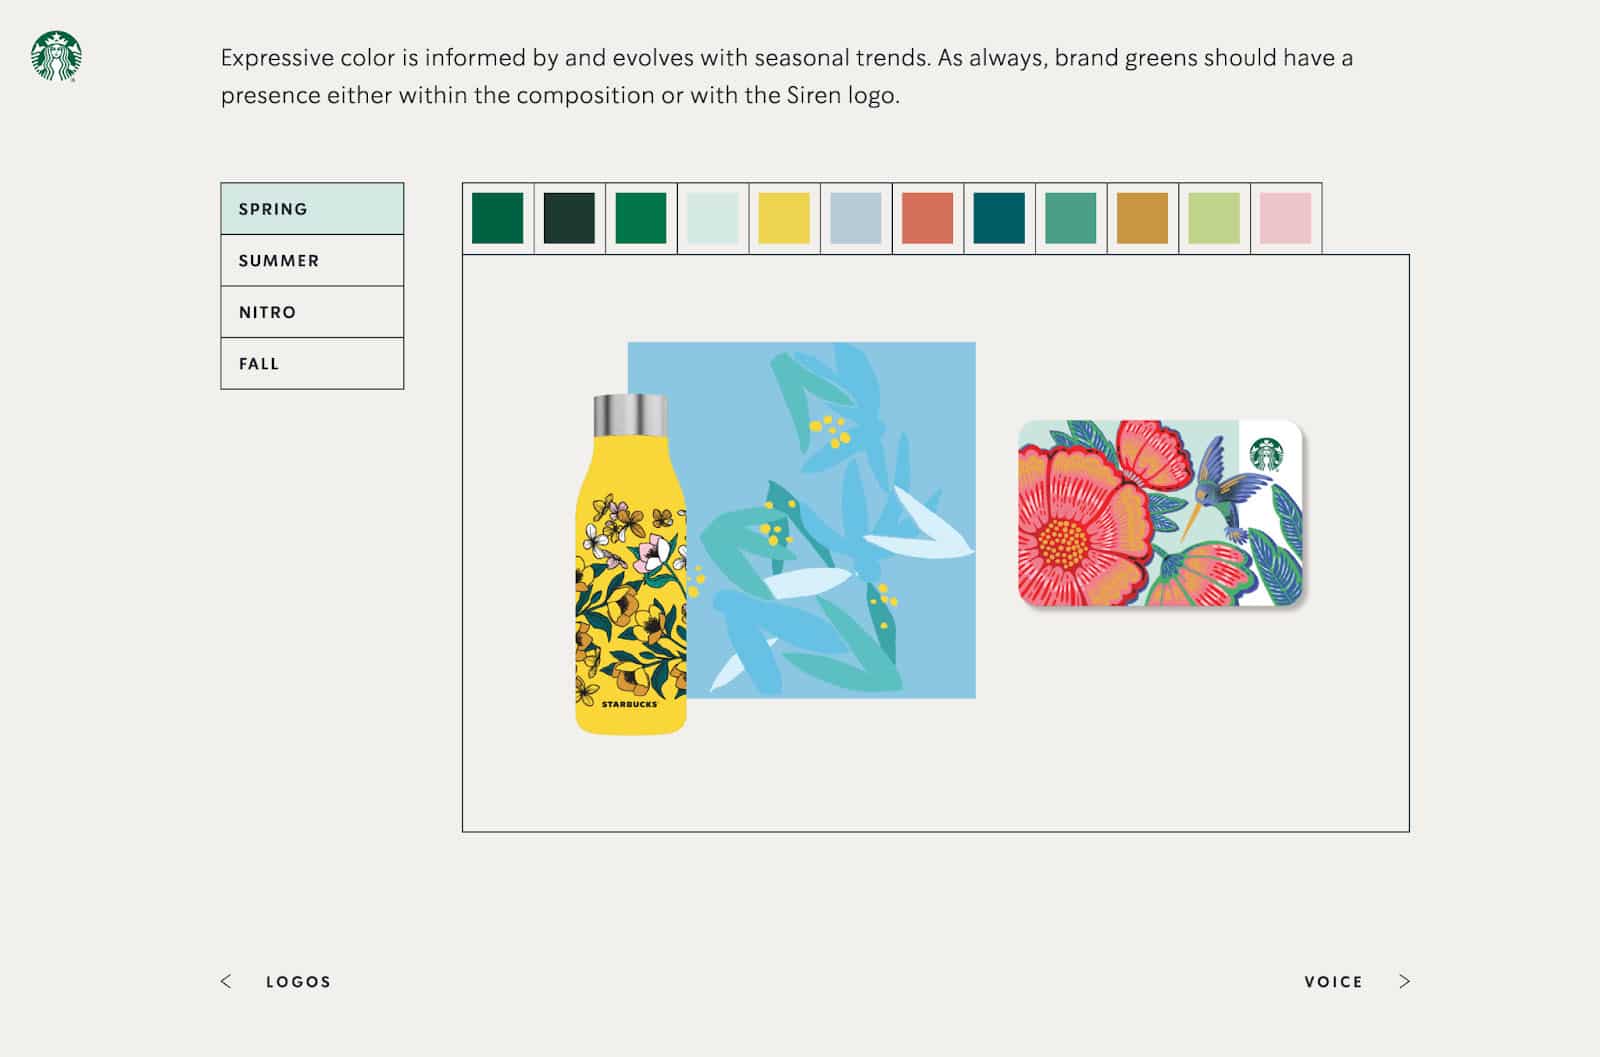 Color Explanation from the Starbucks Brand Style Guide.